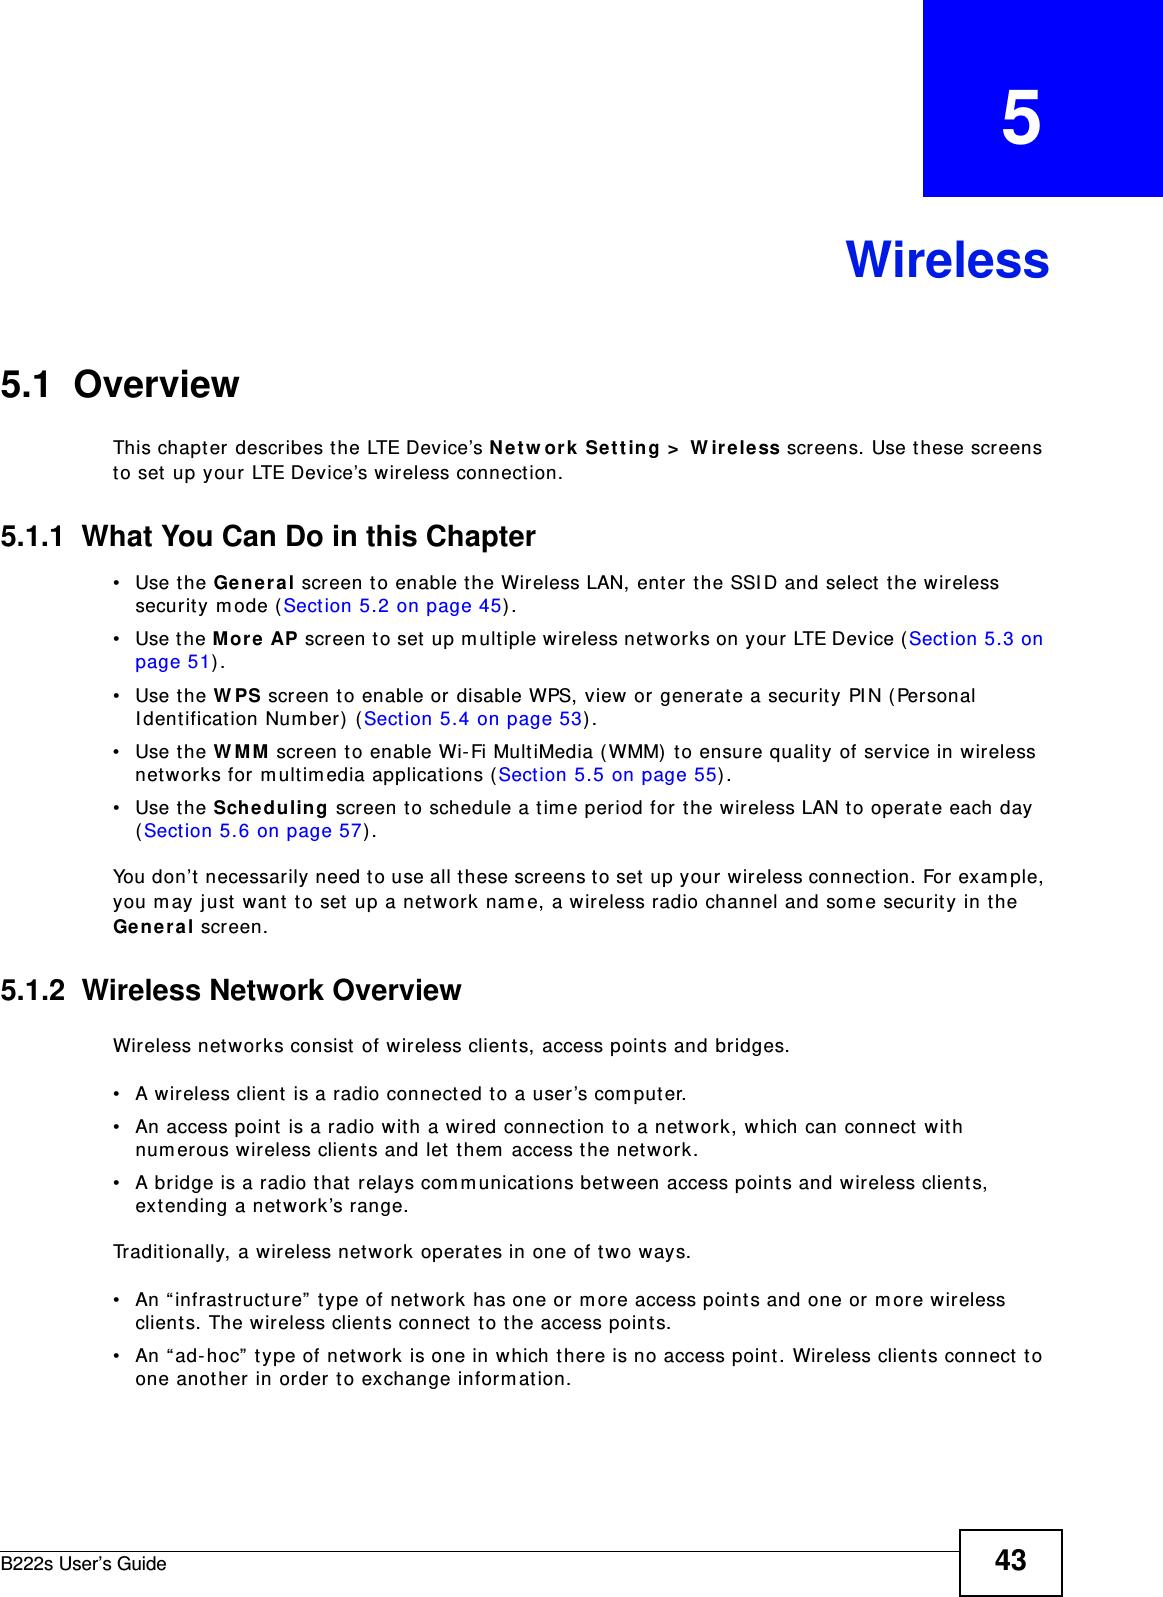 B222s User’s Guide 43CHAPTER   5Wireless5.1  Overview This chapt er  describes t he LTE Device’s N e t w or k  Se t ting &gt;  W ir e less screens. Use these screens to set up your LTE Device’s wireless connect ion.5.1.1  What You Can Do in this Chapter• Use the Genera l screen to enable t he Wireless LAN, ent er t he SSI D and select  t he wireless securit y m ode ( Sect ion 5.2 on page 45) .• Use the M or e  AP scr een t o set  u p m ult iple w ir eless net w or ks on your  LTE Dev ice ( Sect ion 5.3 on page 51) .• Use the W PS screen to enable or disable WPS, view or generat e a security PI N ( Personal I dent ificat ion Num ber)  ( Sect ion 5.4 on page 53) .• Use the W MM  screen to enable Wi- Fi MultiMedia ( WMM)  t o ensure quality of service in wireless networks for m ult im edia applications (Sect ion 5.5 on page 55) . • Use the Sche duling screen to schedule a tim e period for t he wireless LAN t o operate each day (Section 5.6 on page 57) .You don’t necessarily need t o use all t hese screens t o set up your wireless connect ion. For exam ple, you m ay just want  t o set up a net w ork nam e, a wireless radio channel and som e securit y in the Gen e ra l screen.5.1.2  Wireless Network OverviewWireless networks consist  of wireless client s, access point s and bridges. • A wireless client  is a radio connected t o a user’s com put er. • An access point  is a radio with a wir ed connection t o a net work, which can connect  with num erous wireless clients and let  t hem  access t he network. • A bridge is a radio t hat  relays com m unicat ions bet ween access point s and wireless clients, ext ending a networ k’s range. Traditionally, a wireless net work operat es in one of two ways.• An “ infrastructure”  t ype of net work has one or m ore access point s and one or m ore wireless clients. The w ireless client s connect t o the access point s.• An “ ad- hoc”  t ype of net work is one in which t here is no access point . Wireless client s connect  t o one anot her in order to exchange inform ation.